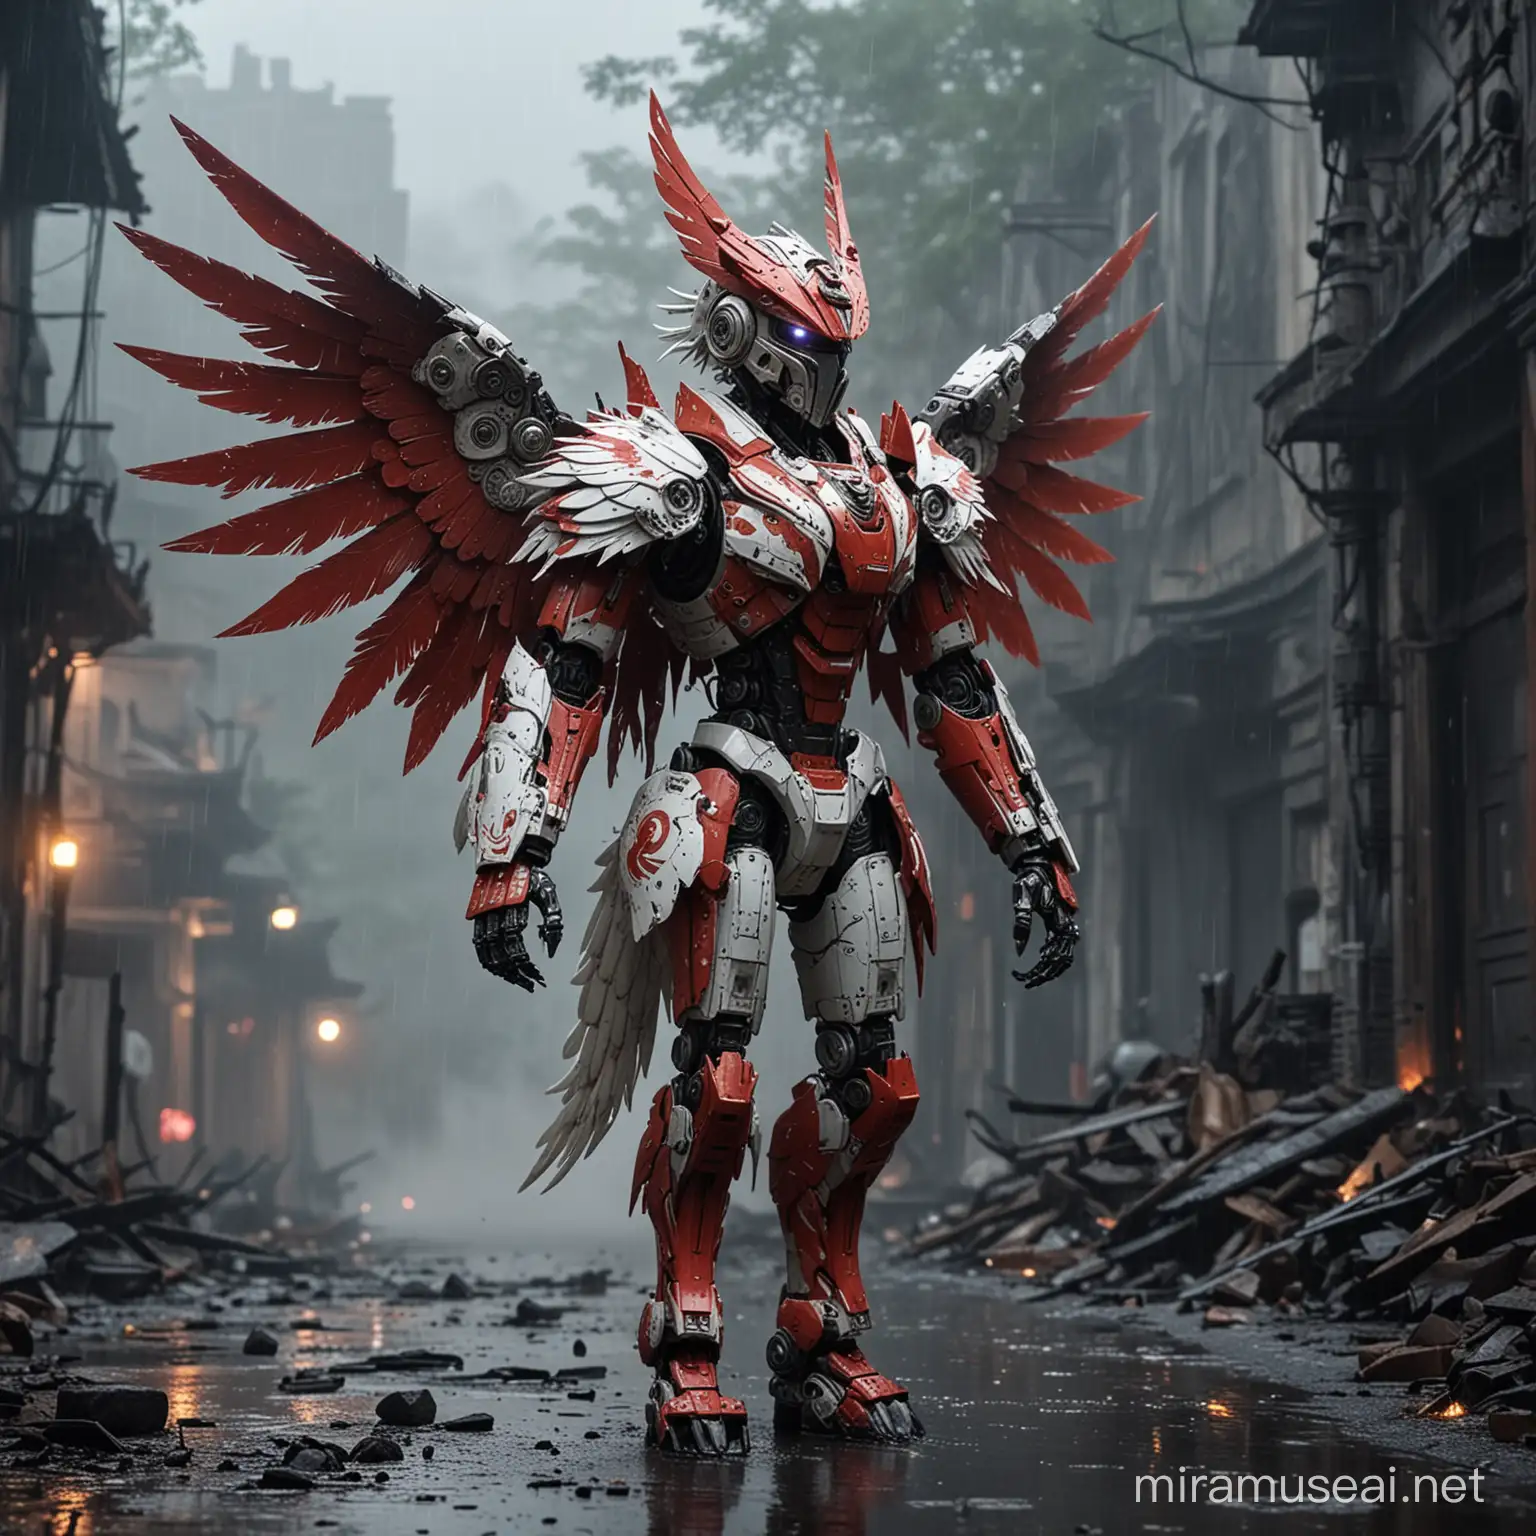 Dynamic Red and White Winged Garuda Robot Walking Amidst Rain and Ruins